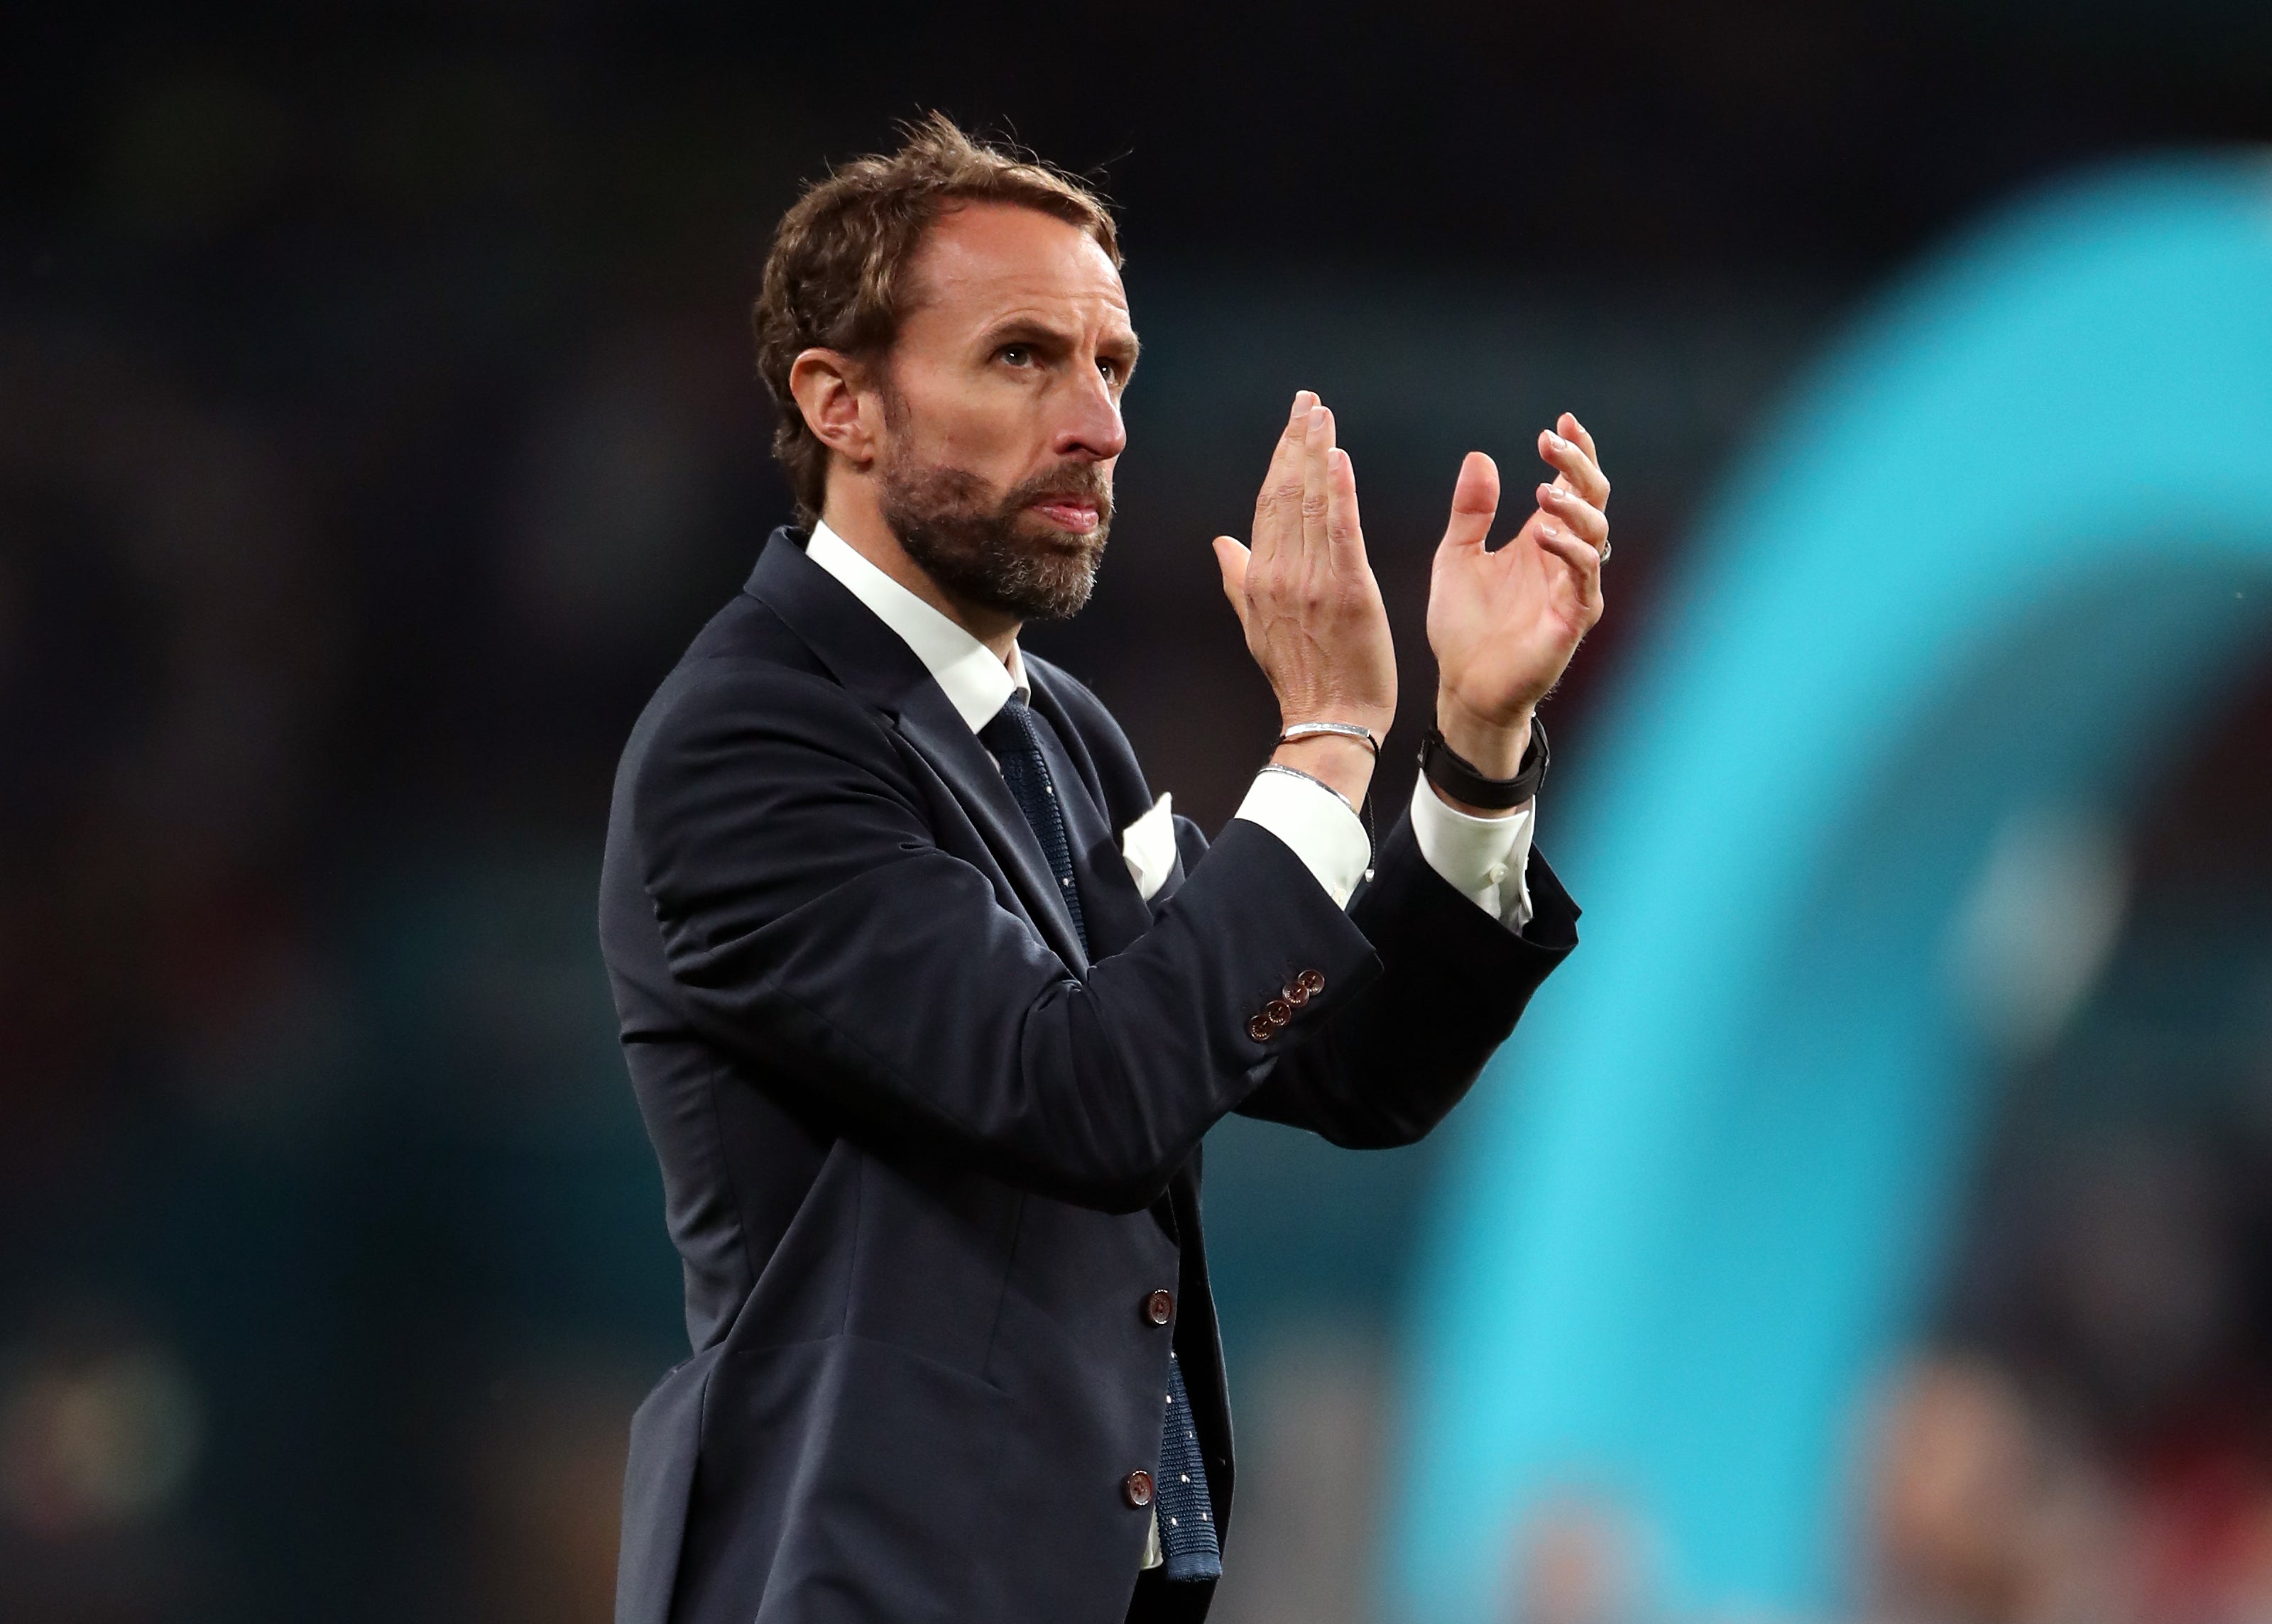 Gareth Southgate felt he experienced the country at its worst after England’s defeat in the Euro 2020 final (Nick Potts/PA)